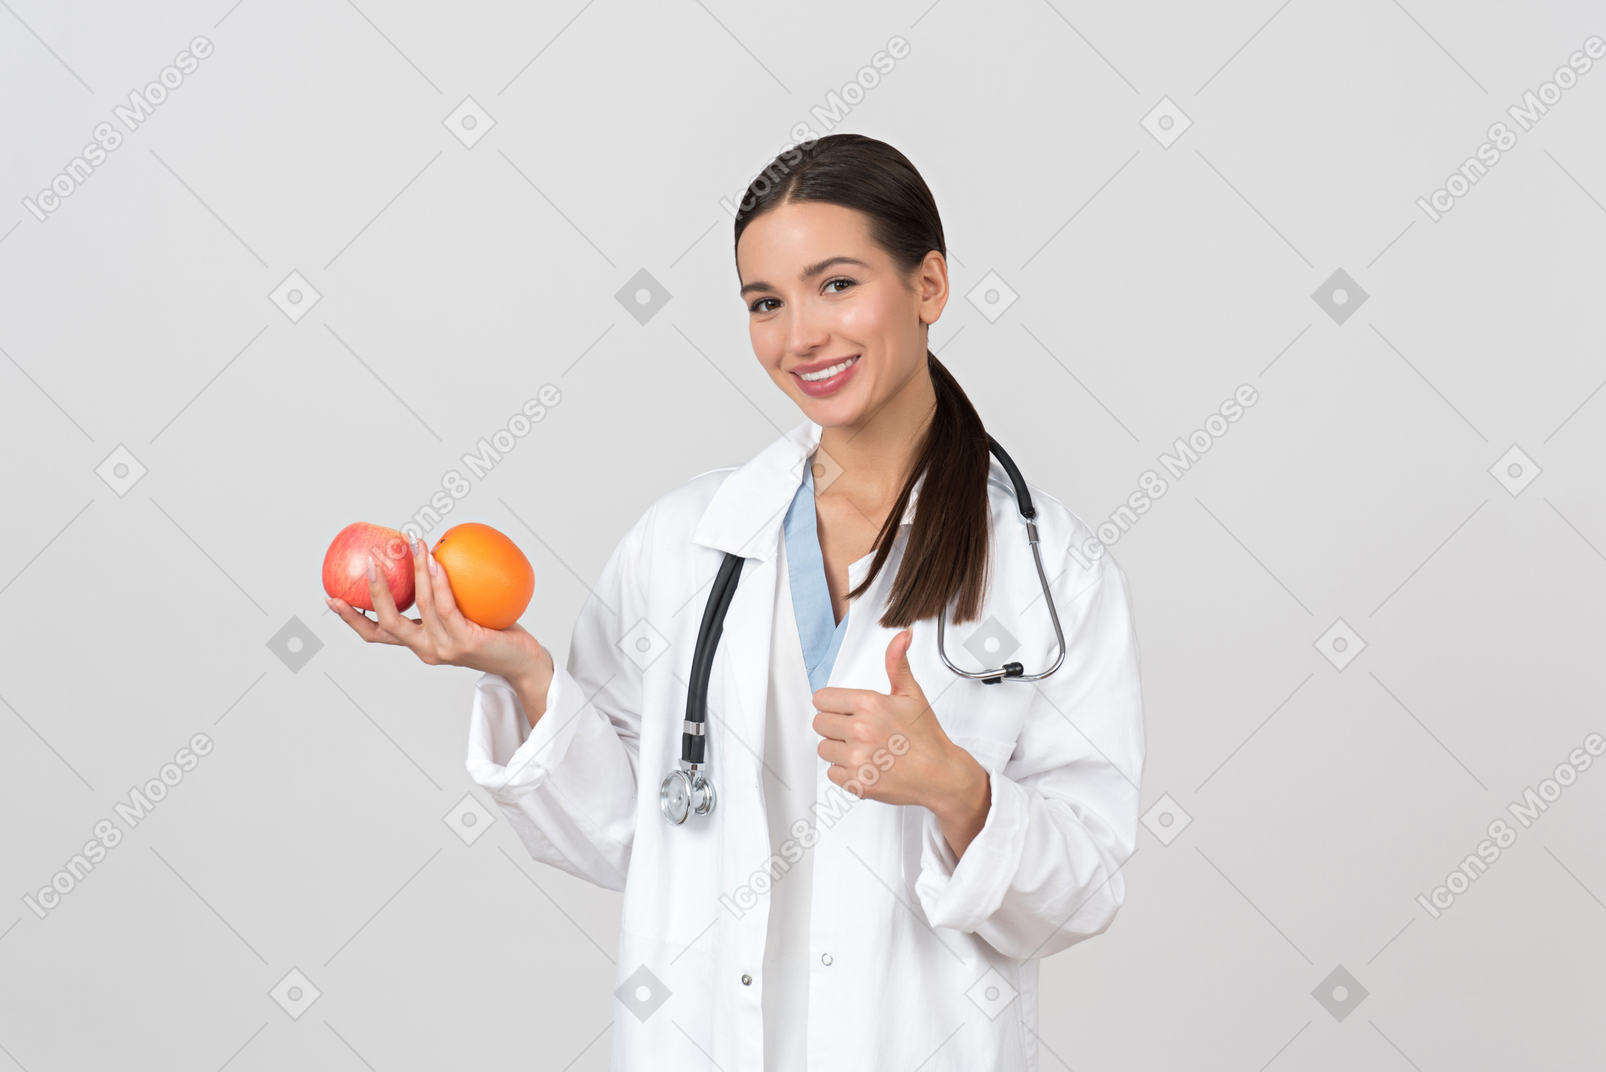 Explaining all the diagnosis problems on fruits